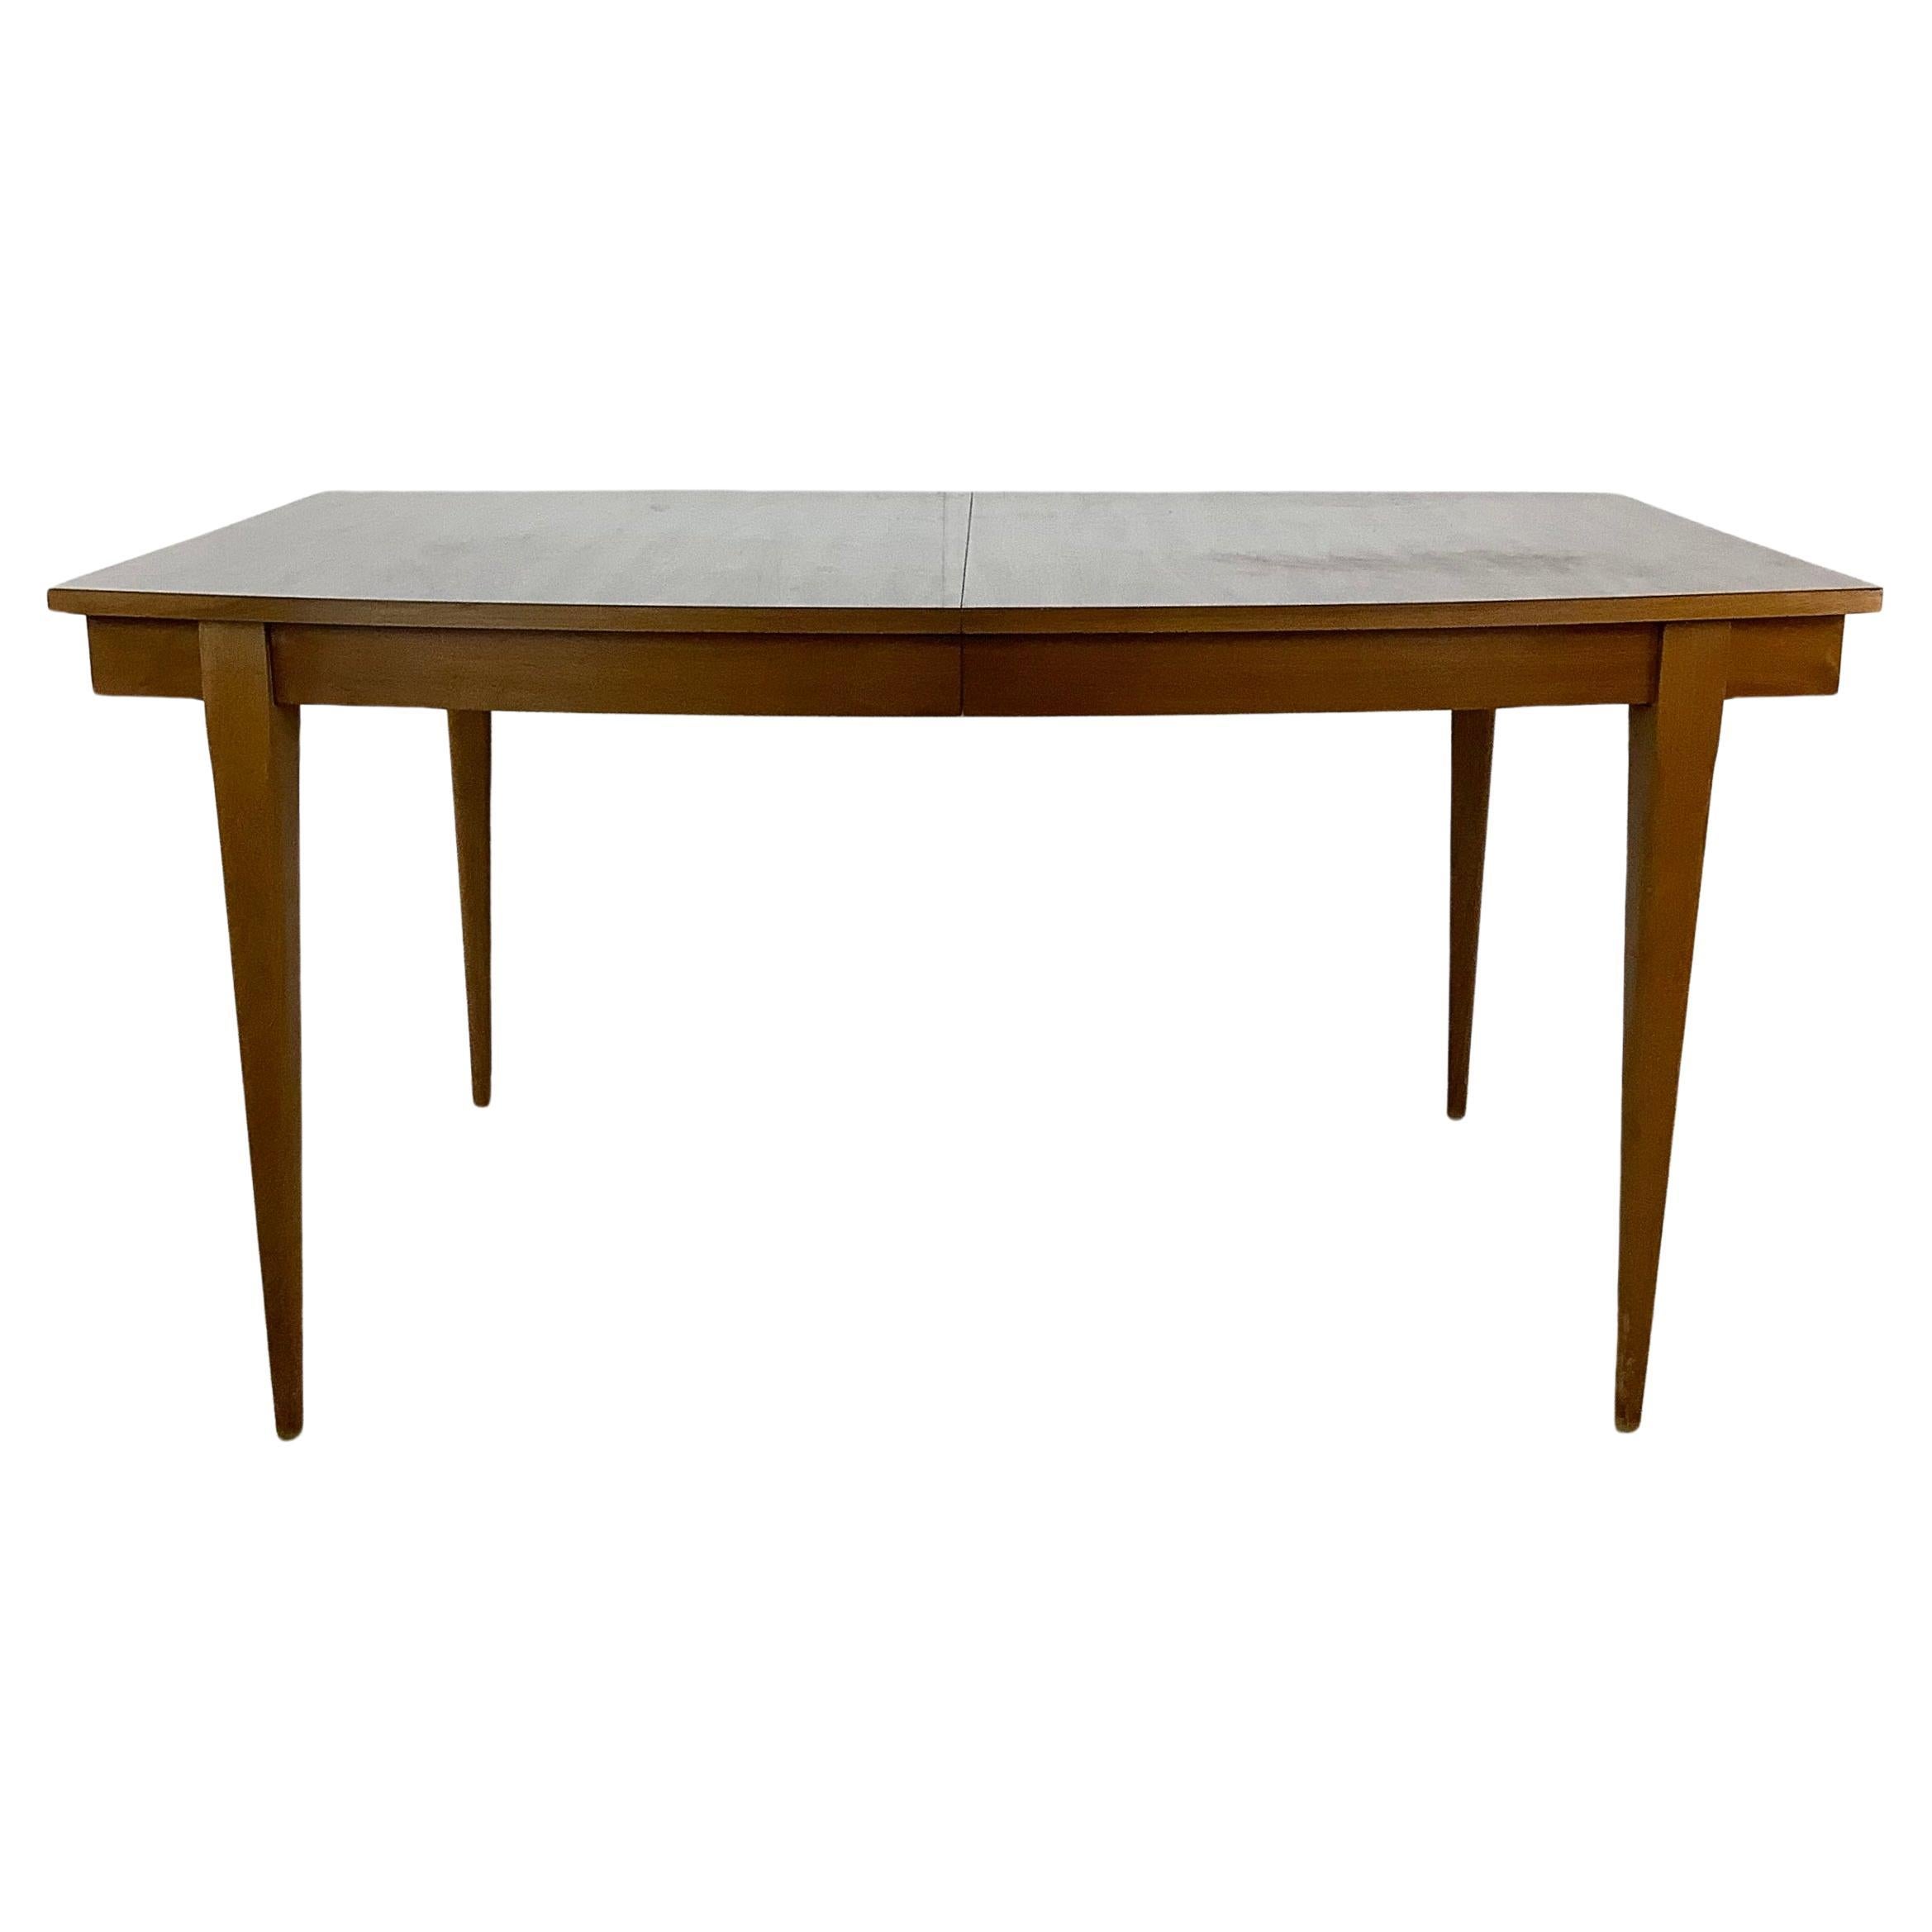 Mid-Century Modern Dining Table With Leaf